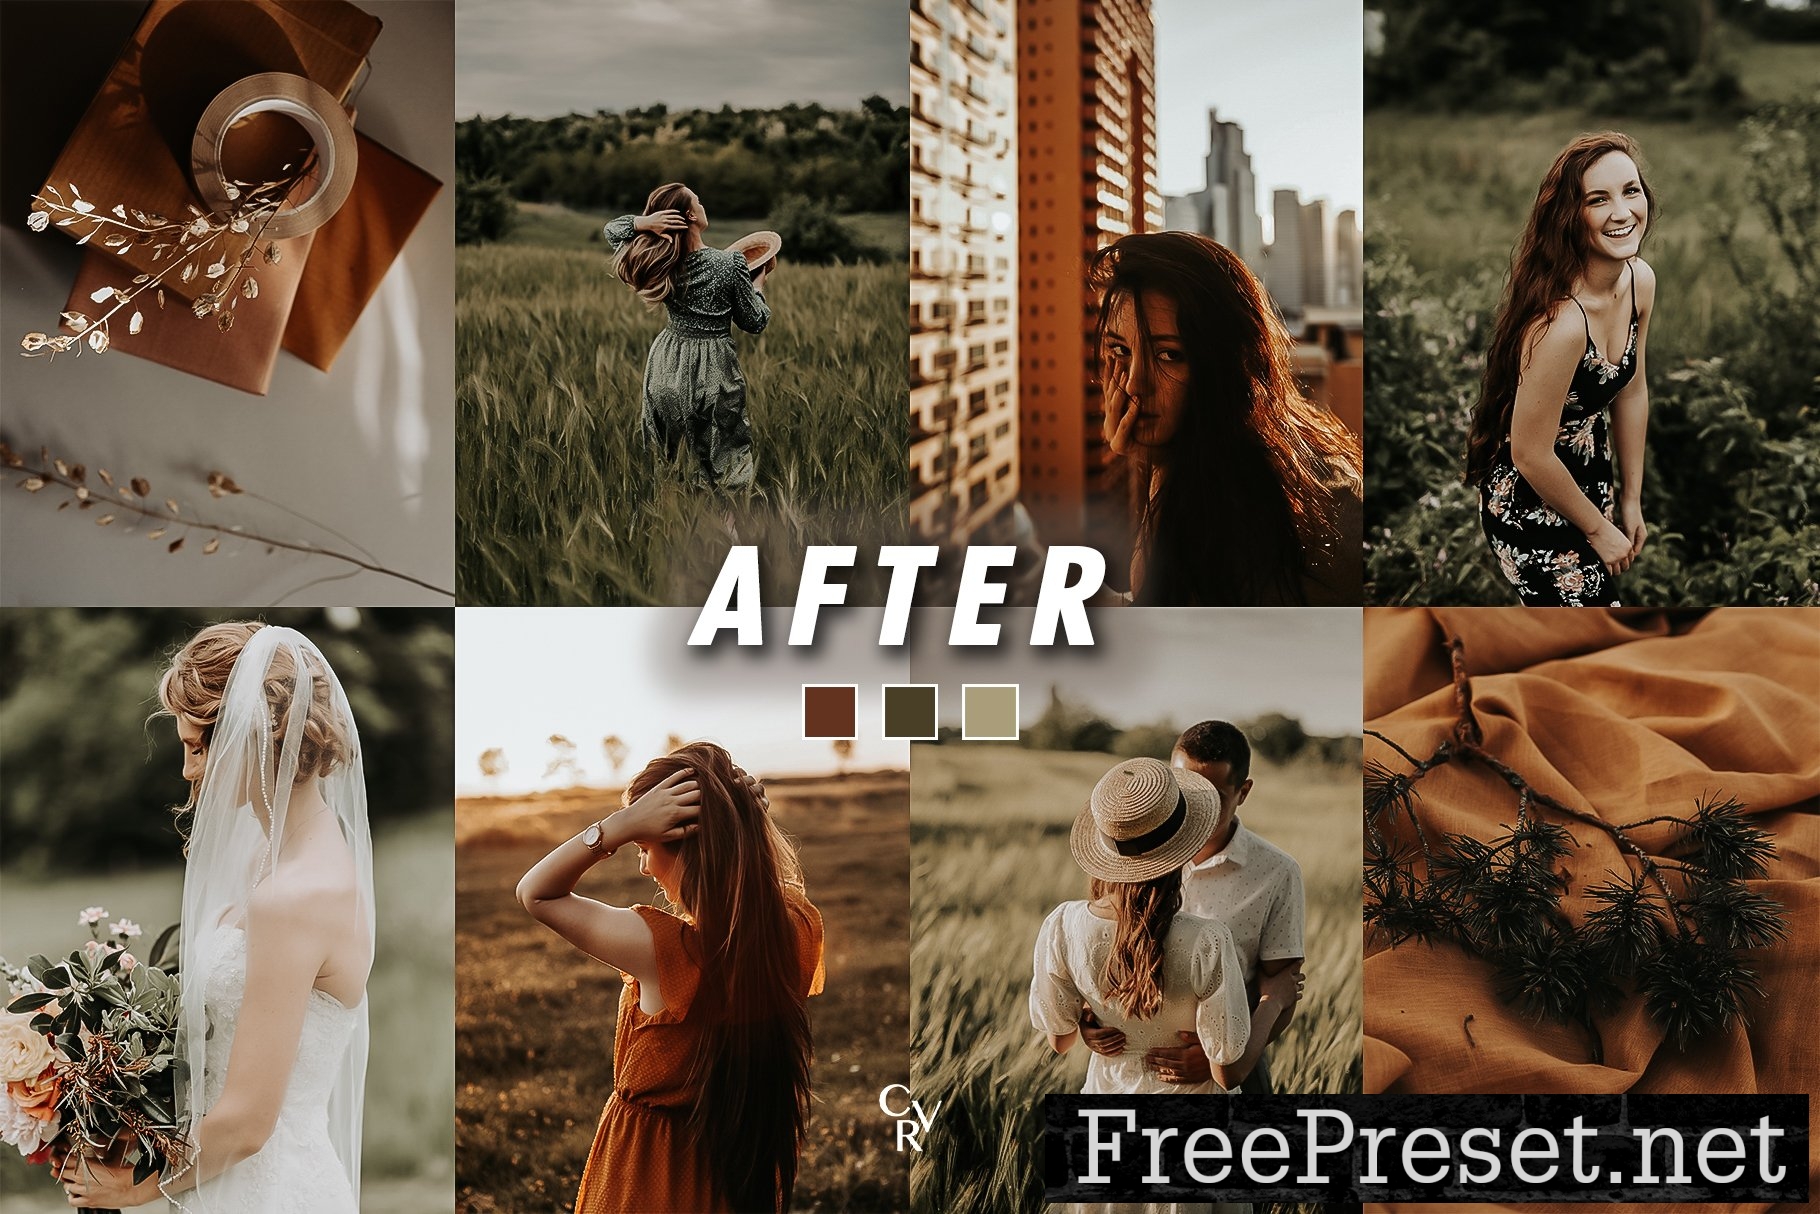 10 Warm and Earthy Lightroom Presets 16071967